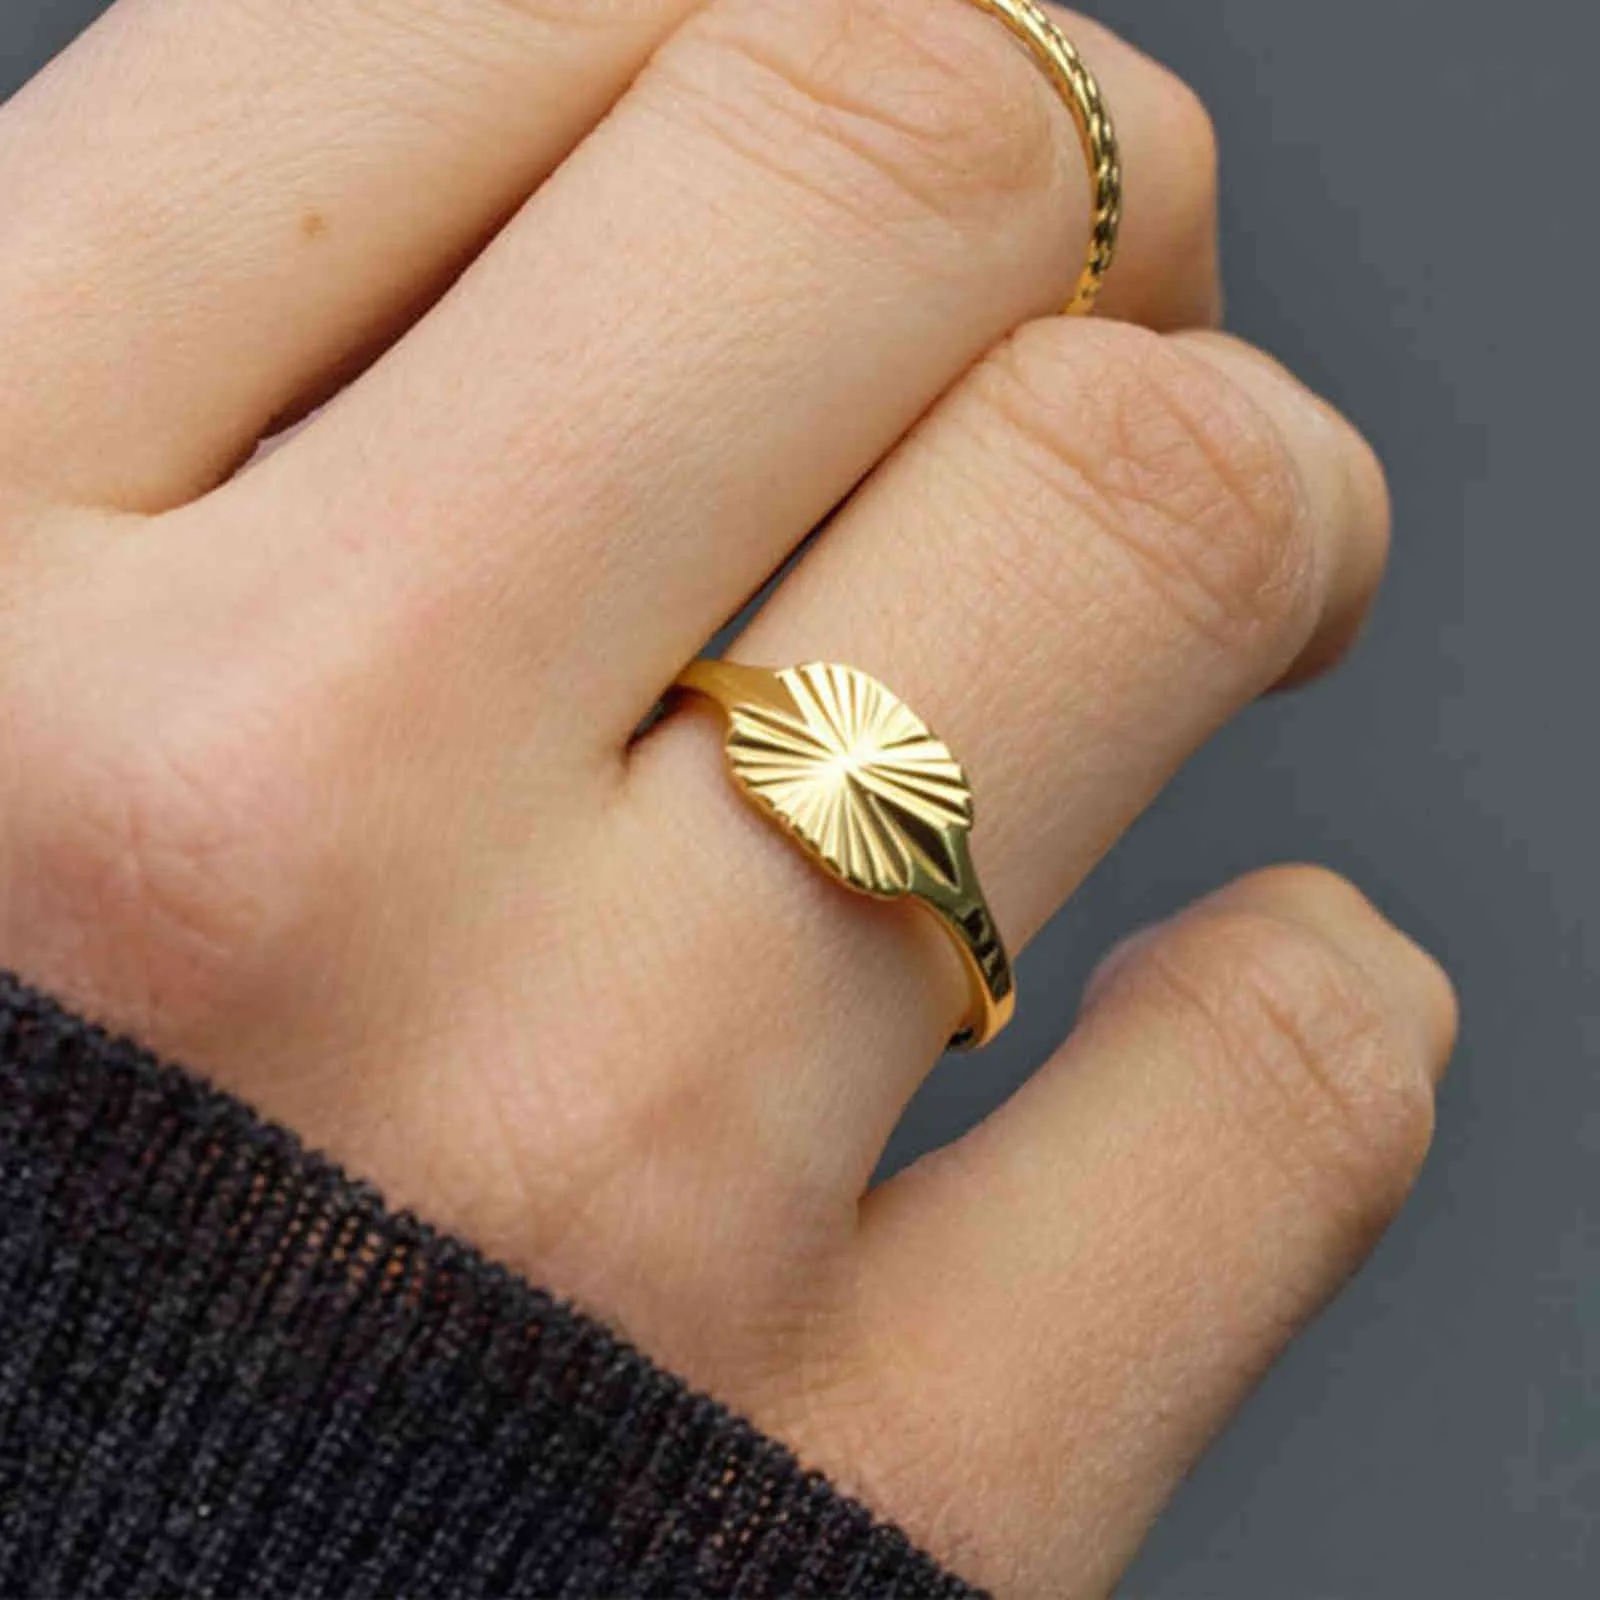 Boho Dainty Square Sun Signet Ring for Women Girls Gold Color Vintage Simple Vergina Sun Signet Ring Female Friends Jewelry Gift G1125